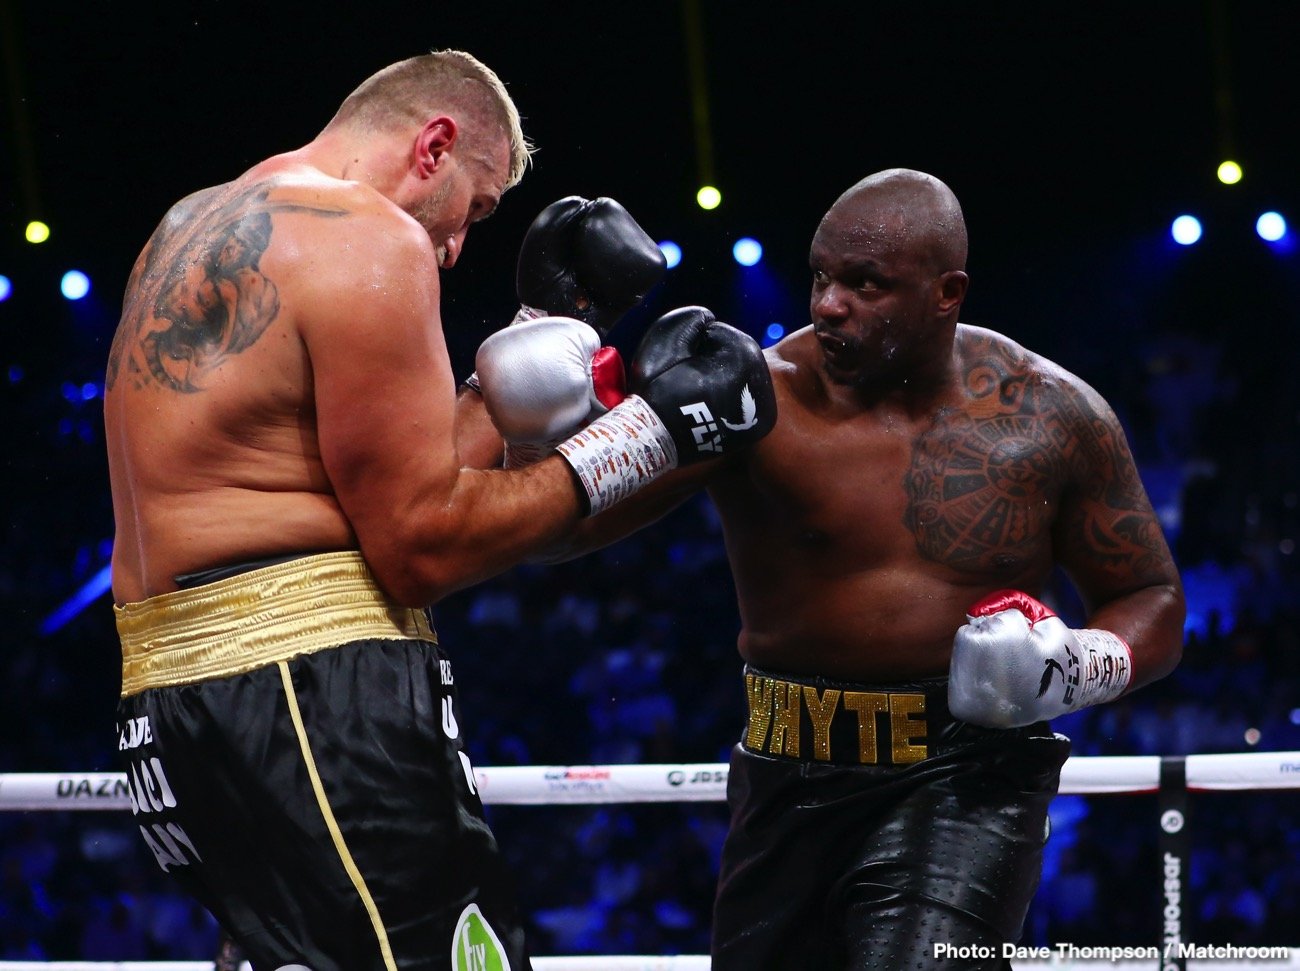 Image: Ruiz Jr. still a possibiliy for Whyte's next fight says Hearn